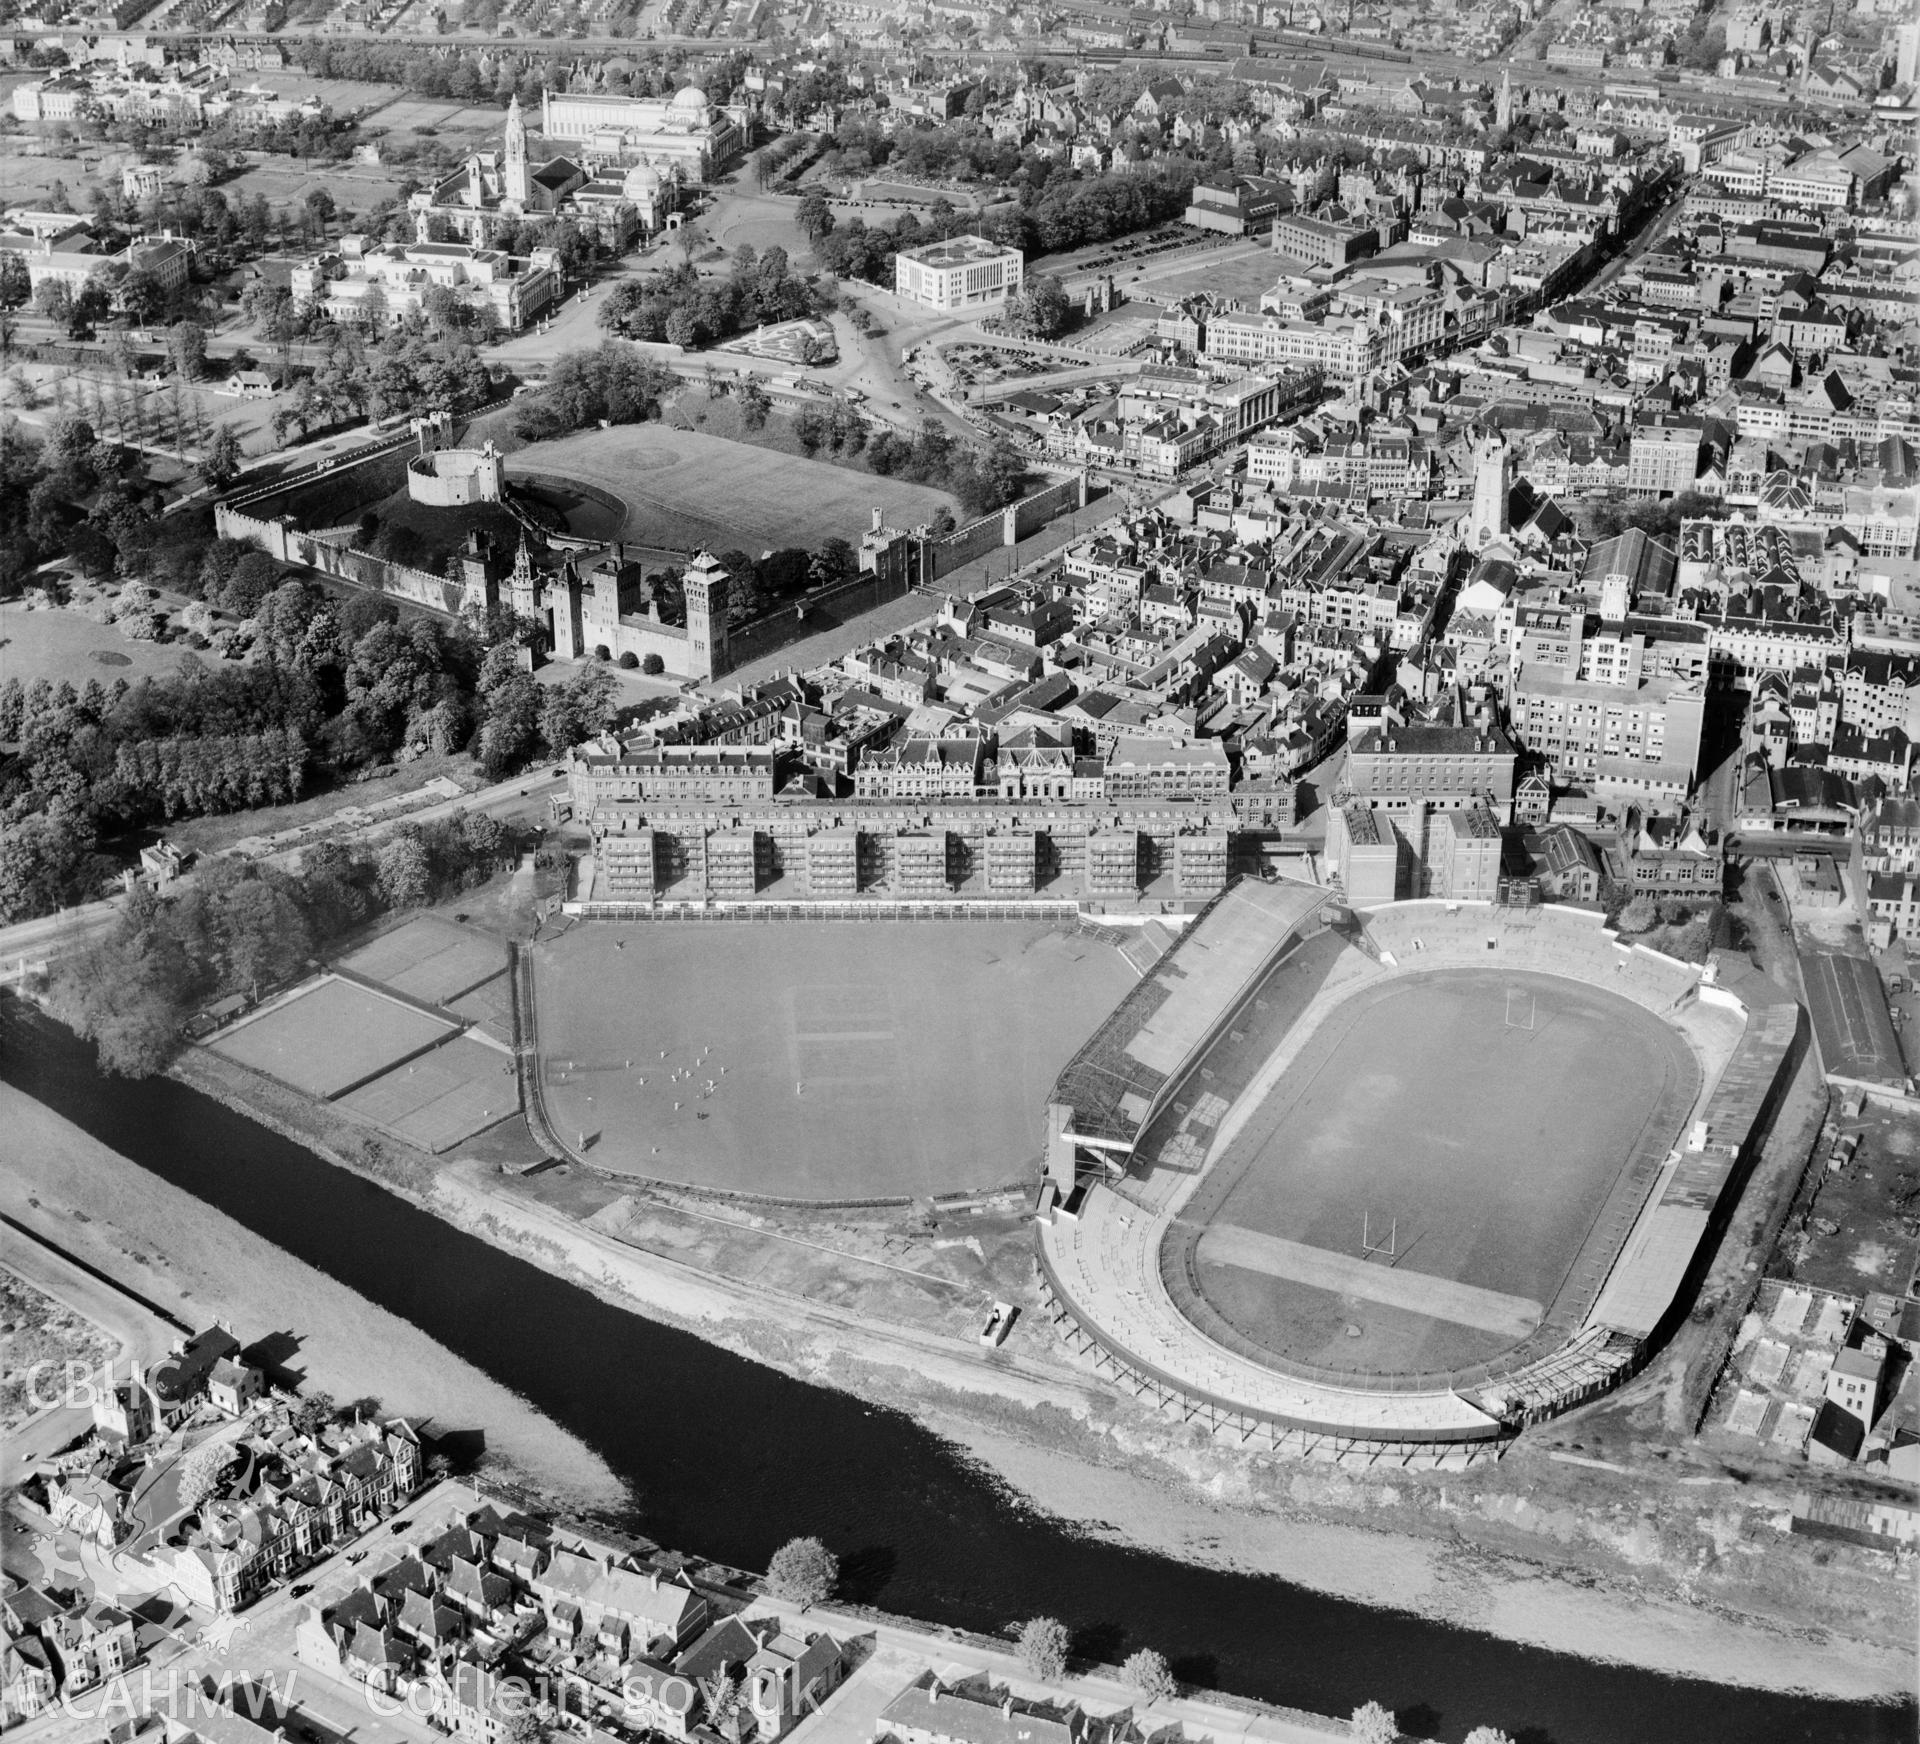 View of Cardiff showing Arms Park and football ground